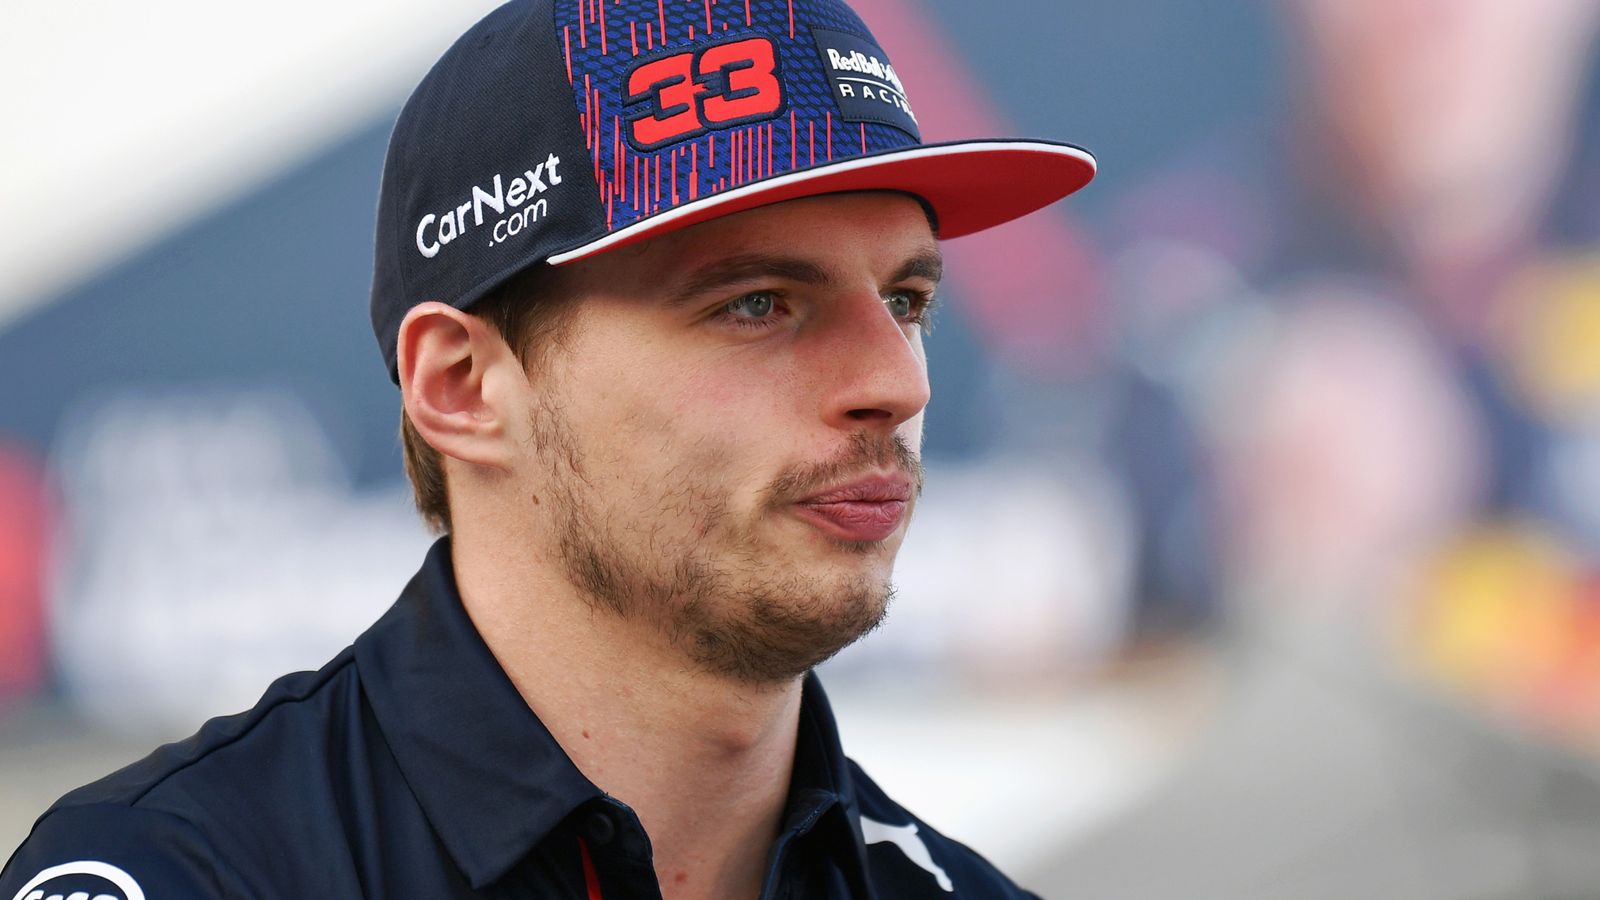 Qatar GP: Max Verstappen happy with Brazil F1 defence and says ‘we are not in kindergarten’